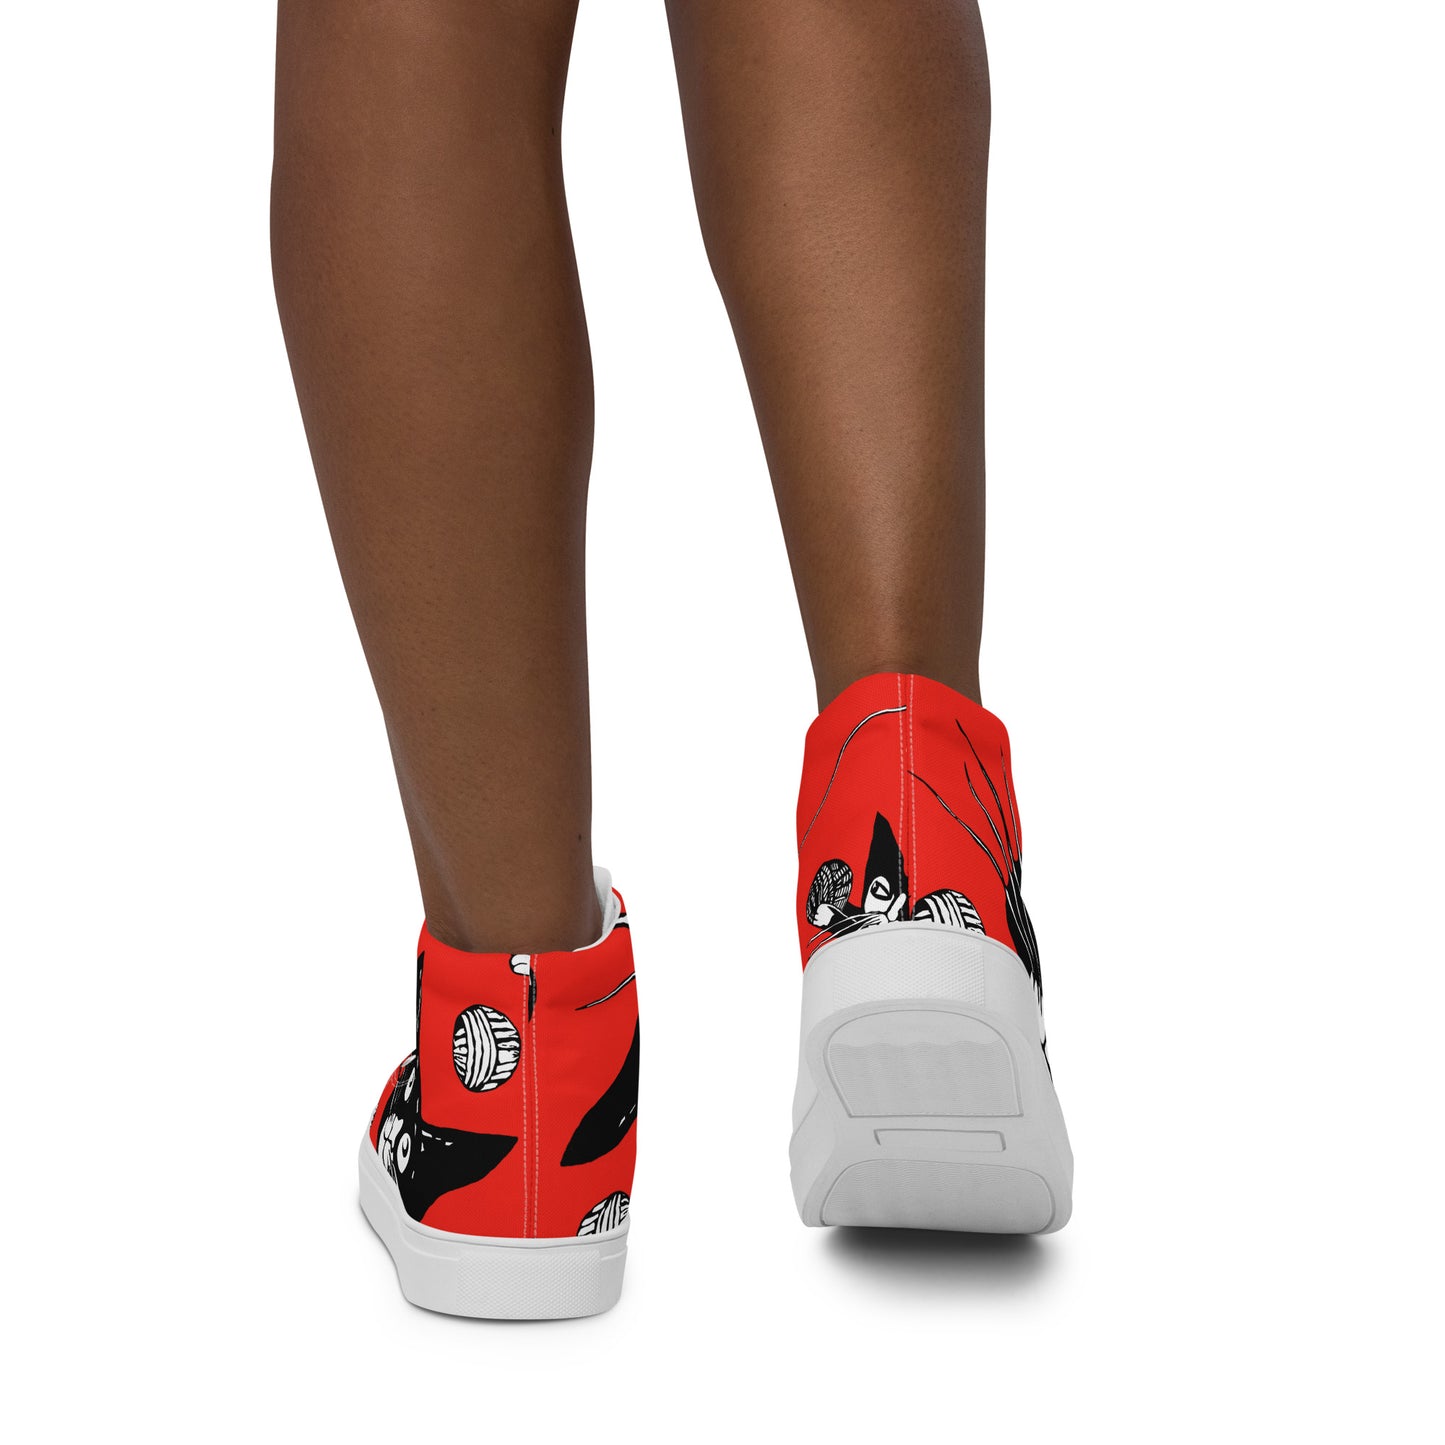 Black Cat and Red Women’s high top canvas shoes